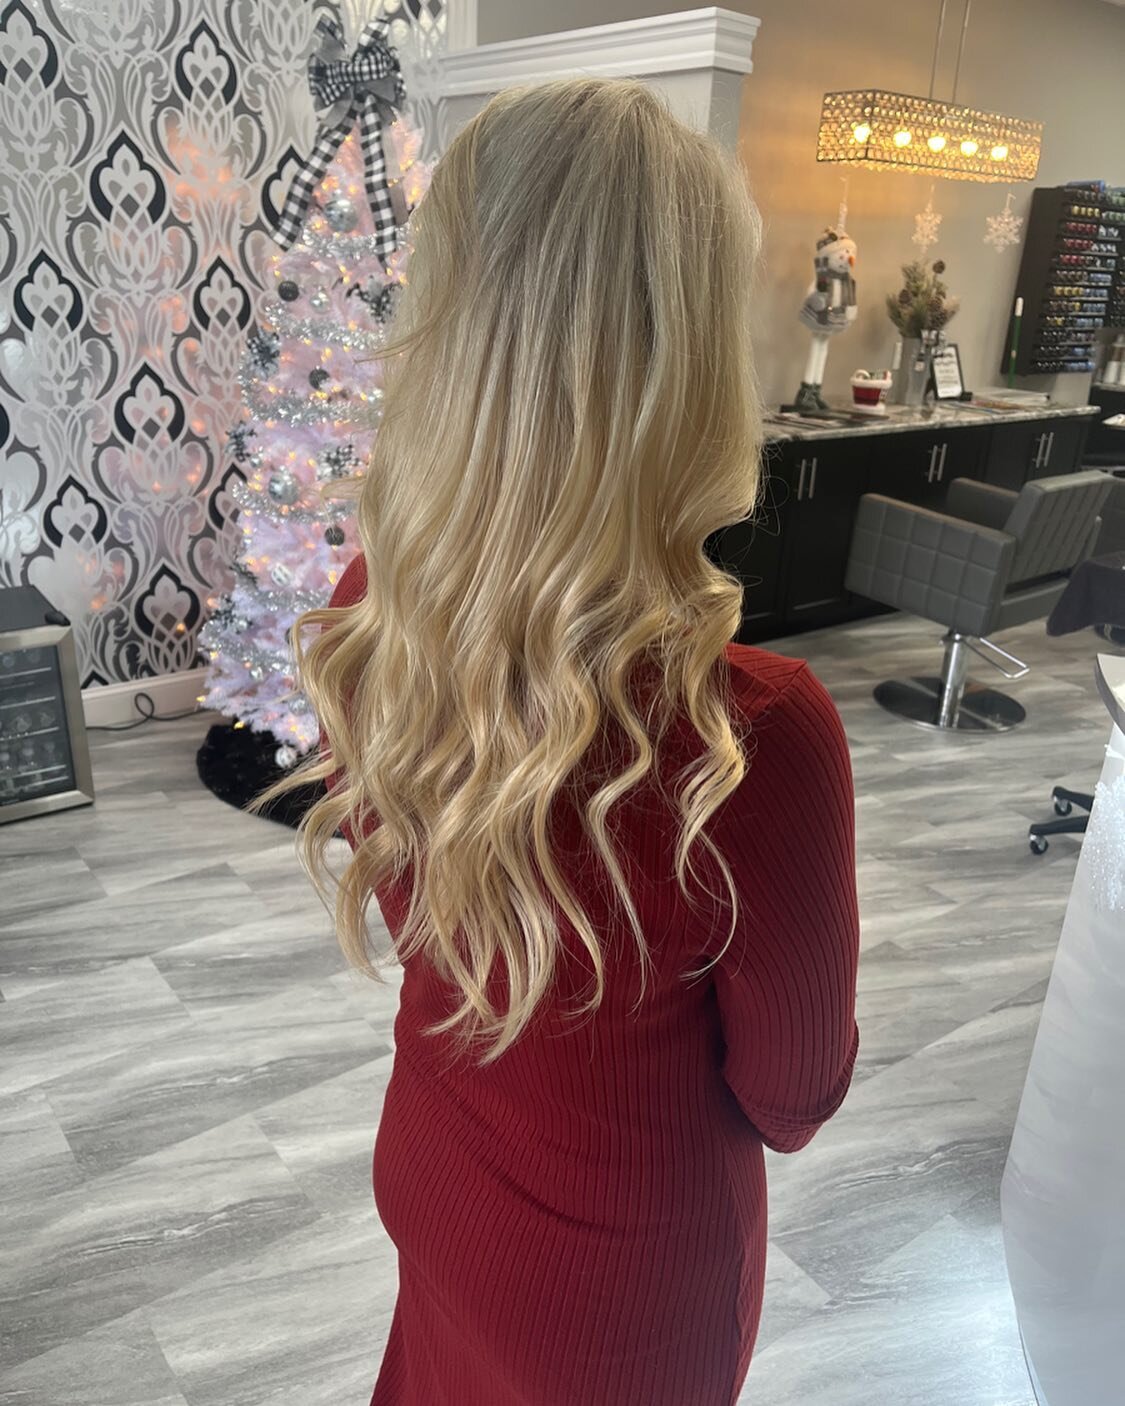 New hair for @kfollo915 🖤🖤😍 

* one pack of @bellamihair tape-ins make all the difference!!! #bellamihair #northshore#extensions #wakefieldsalon#extensioncertified#colormatching